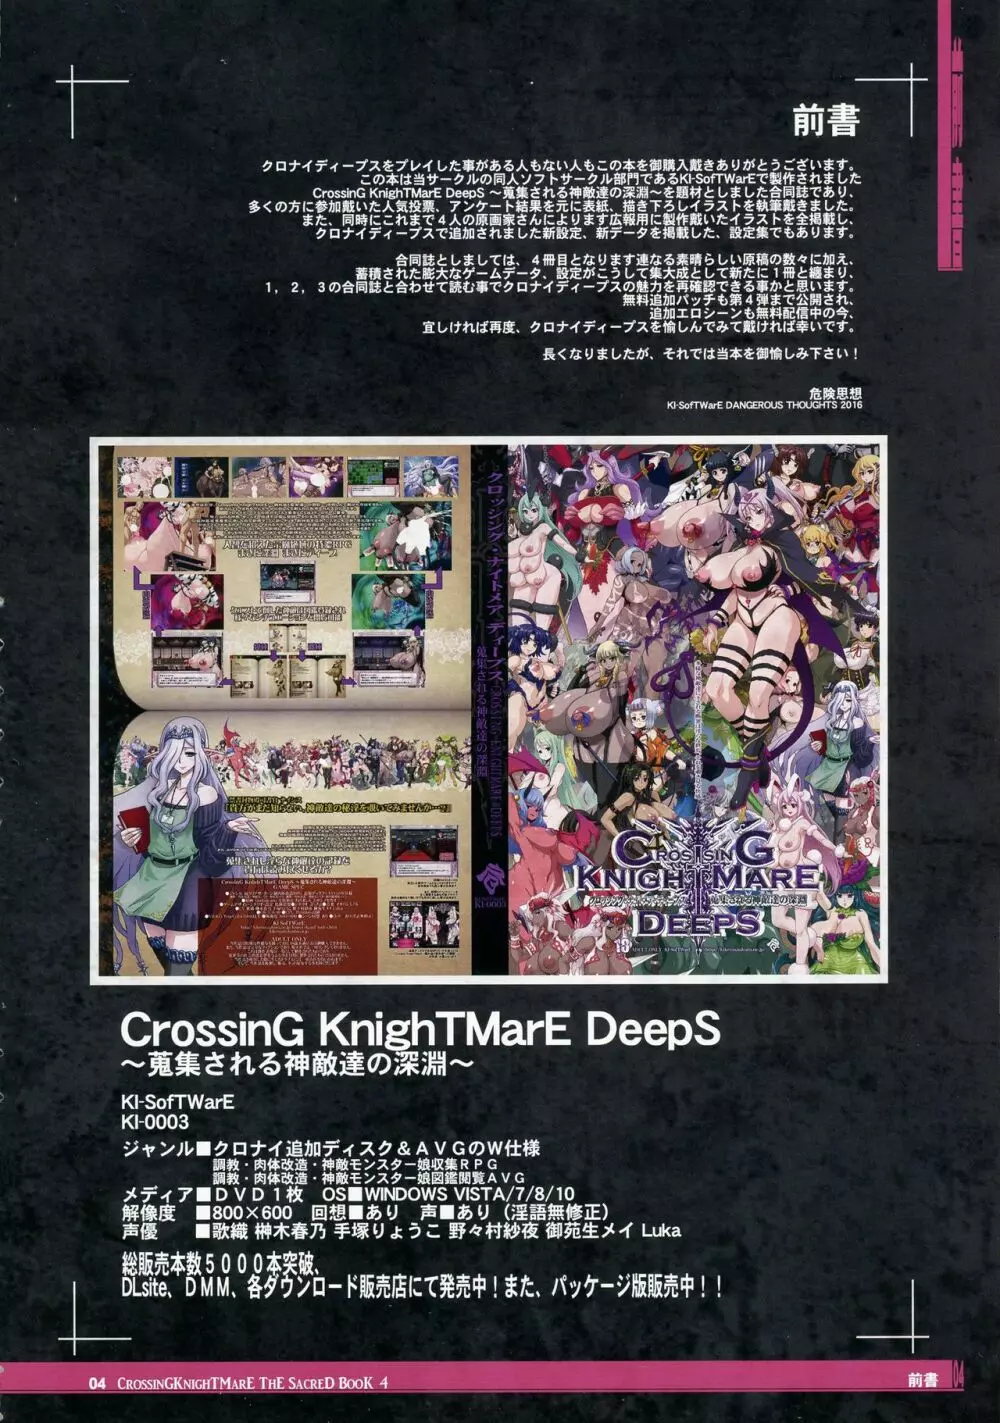 CrossinG KnighTMarE ThE SacreD BooK 4 4ページ